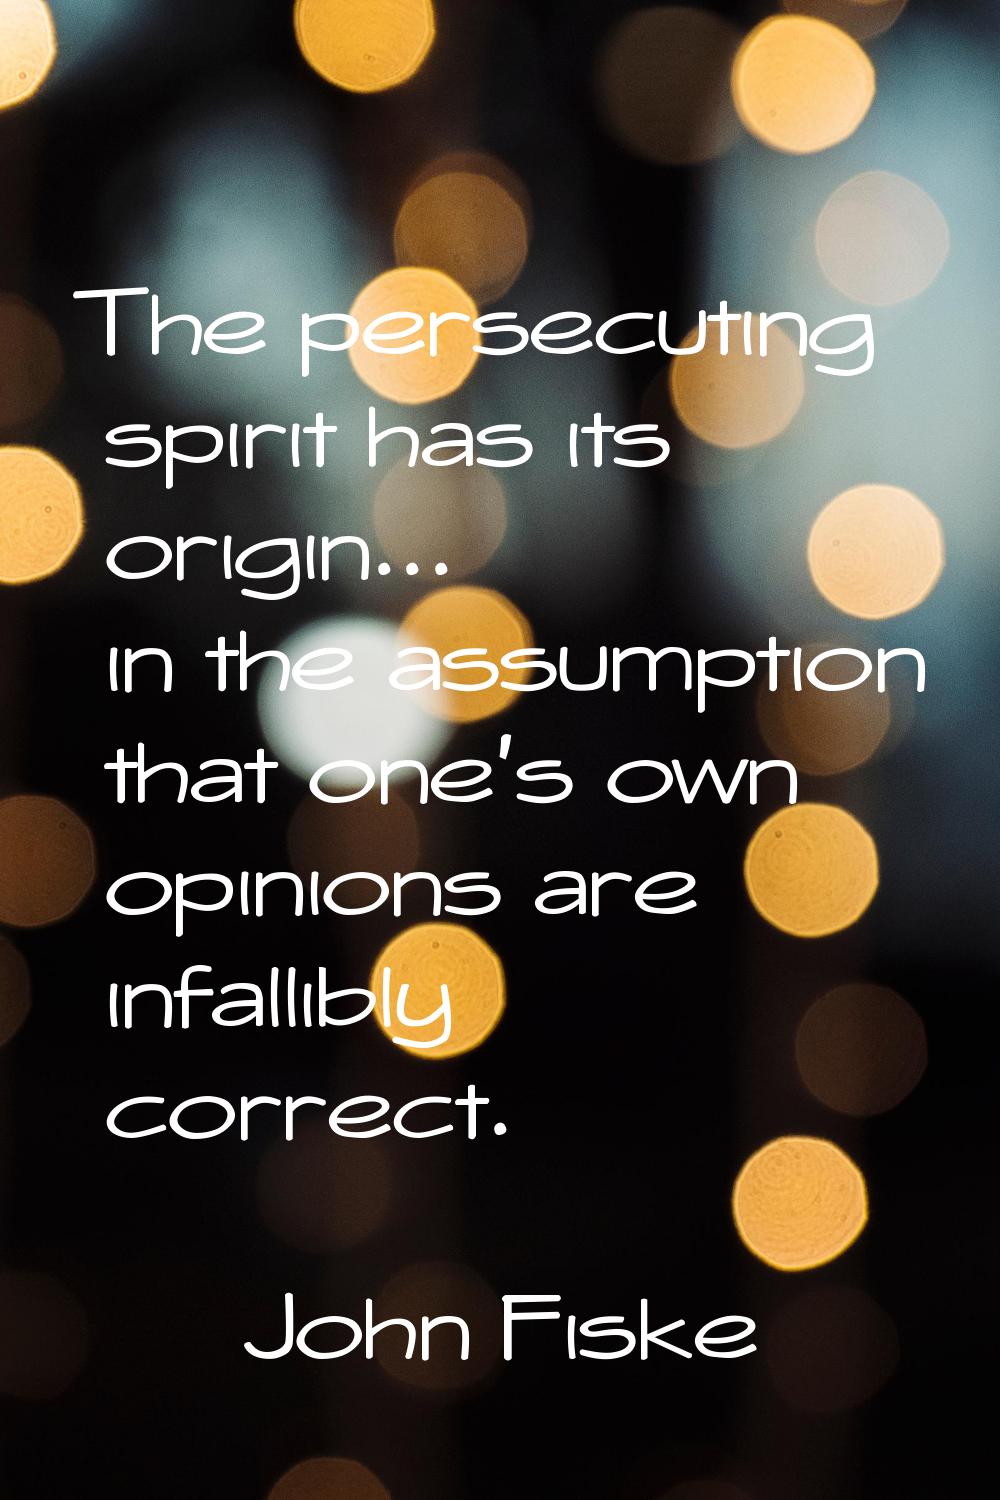 The persecuting spirit has its origin... in the assumption that one's own opinions are infallibly c